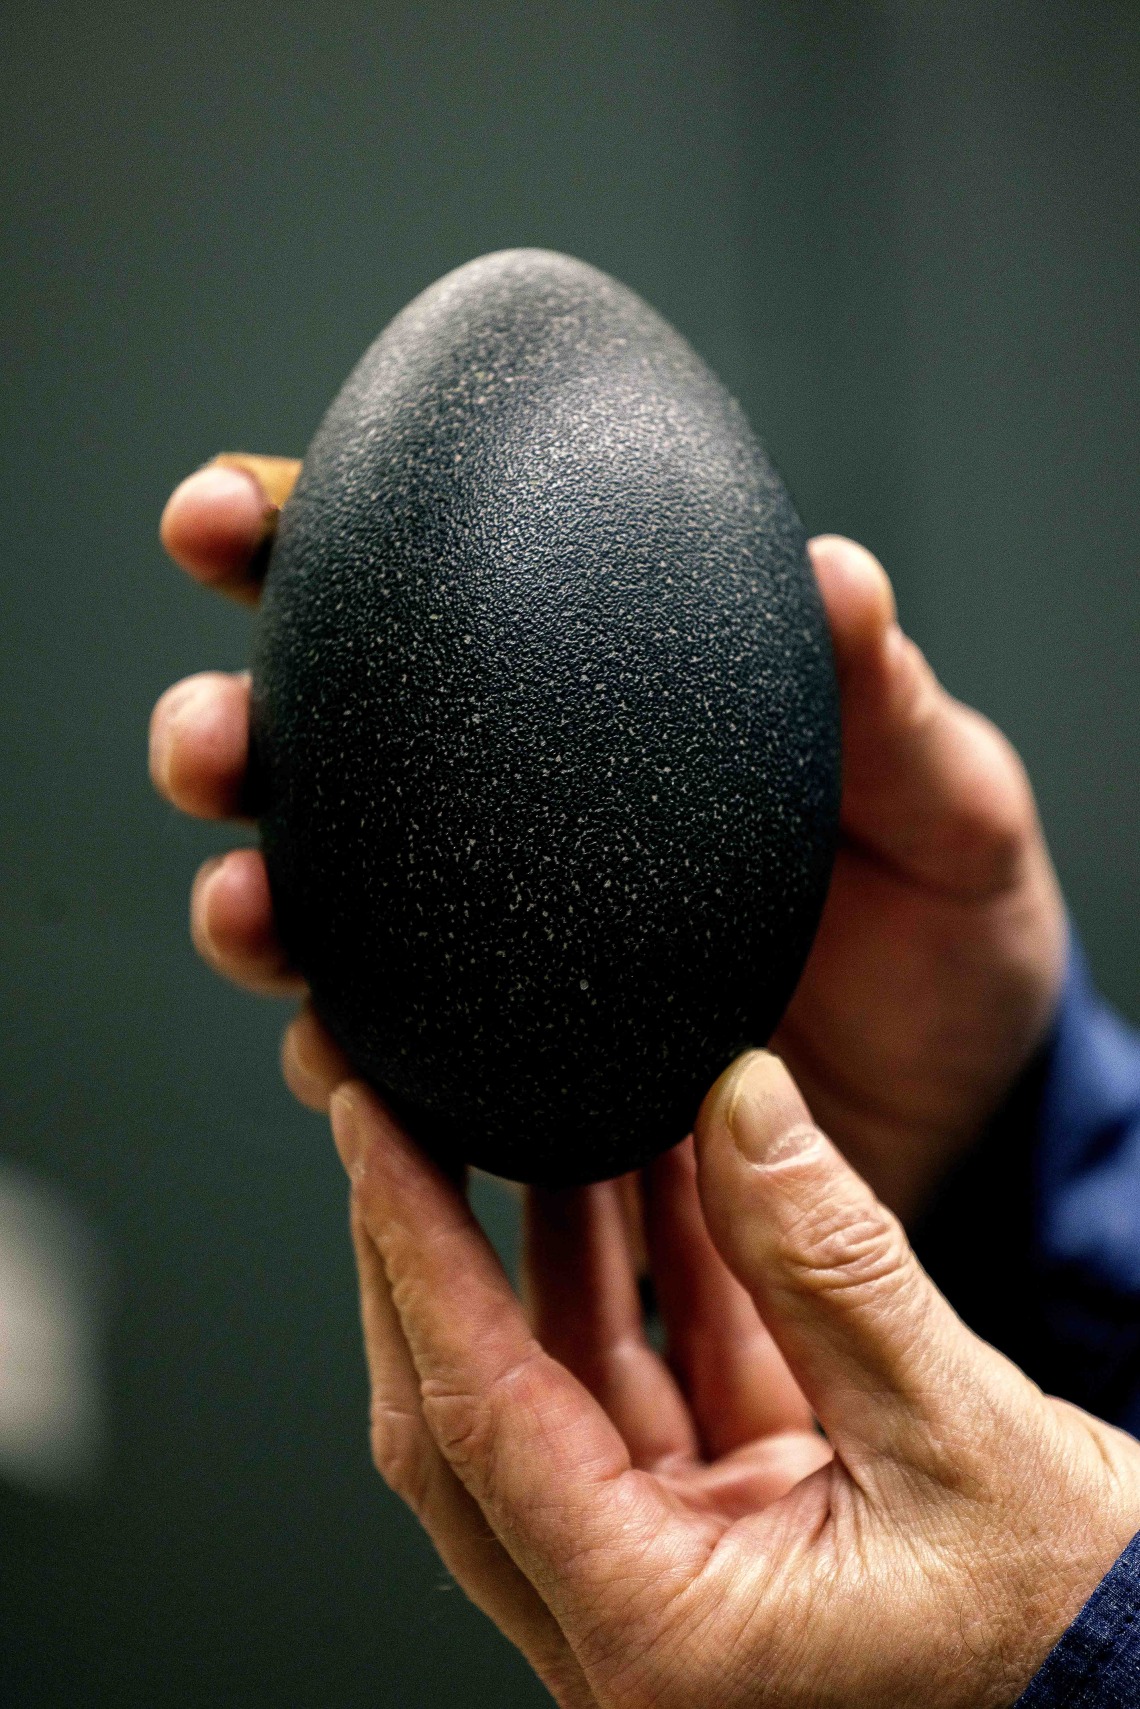 A large fossilized egg